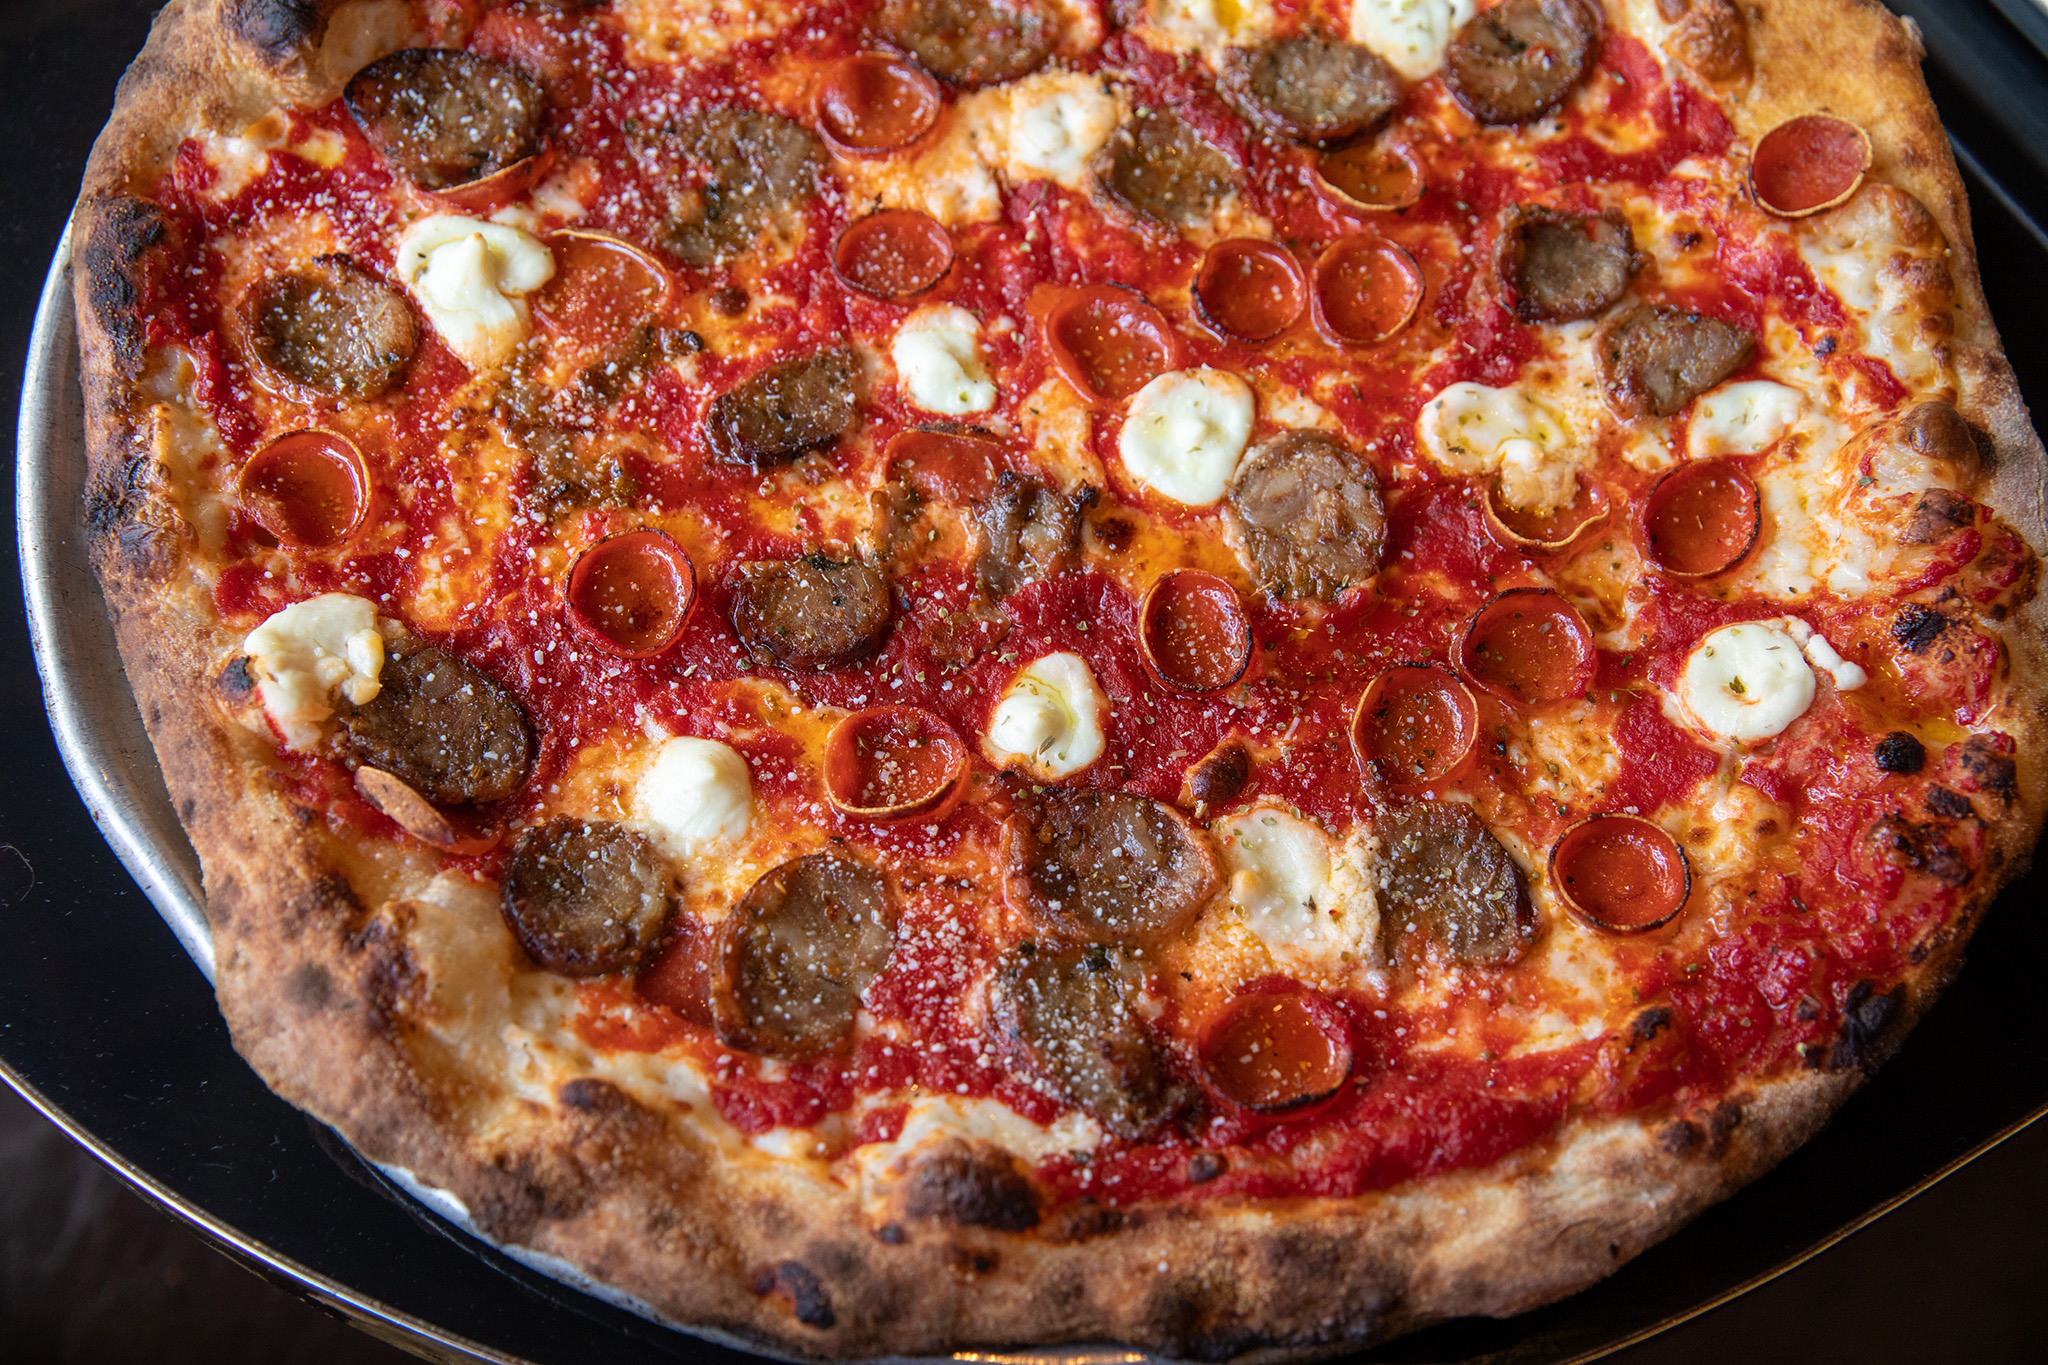 San Francisco’s Exclusive Spot on the World’s Leading Pizzerias List